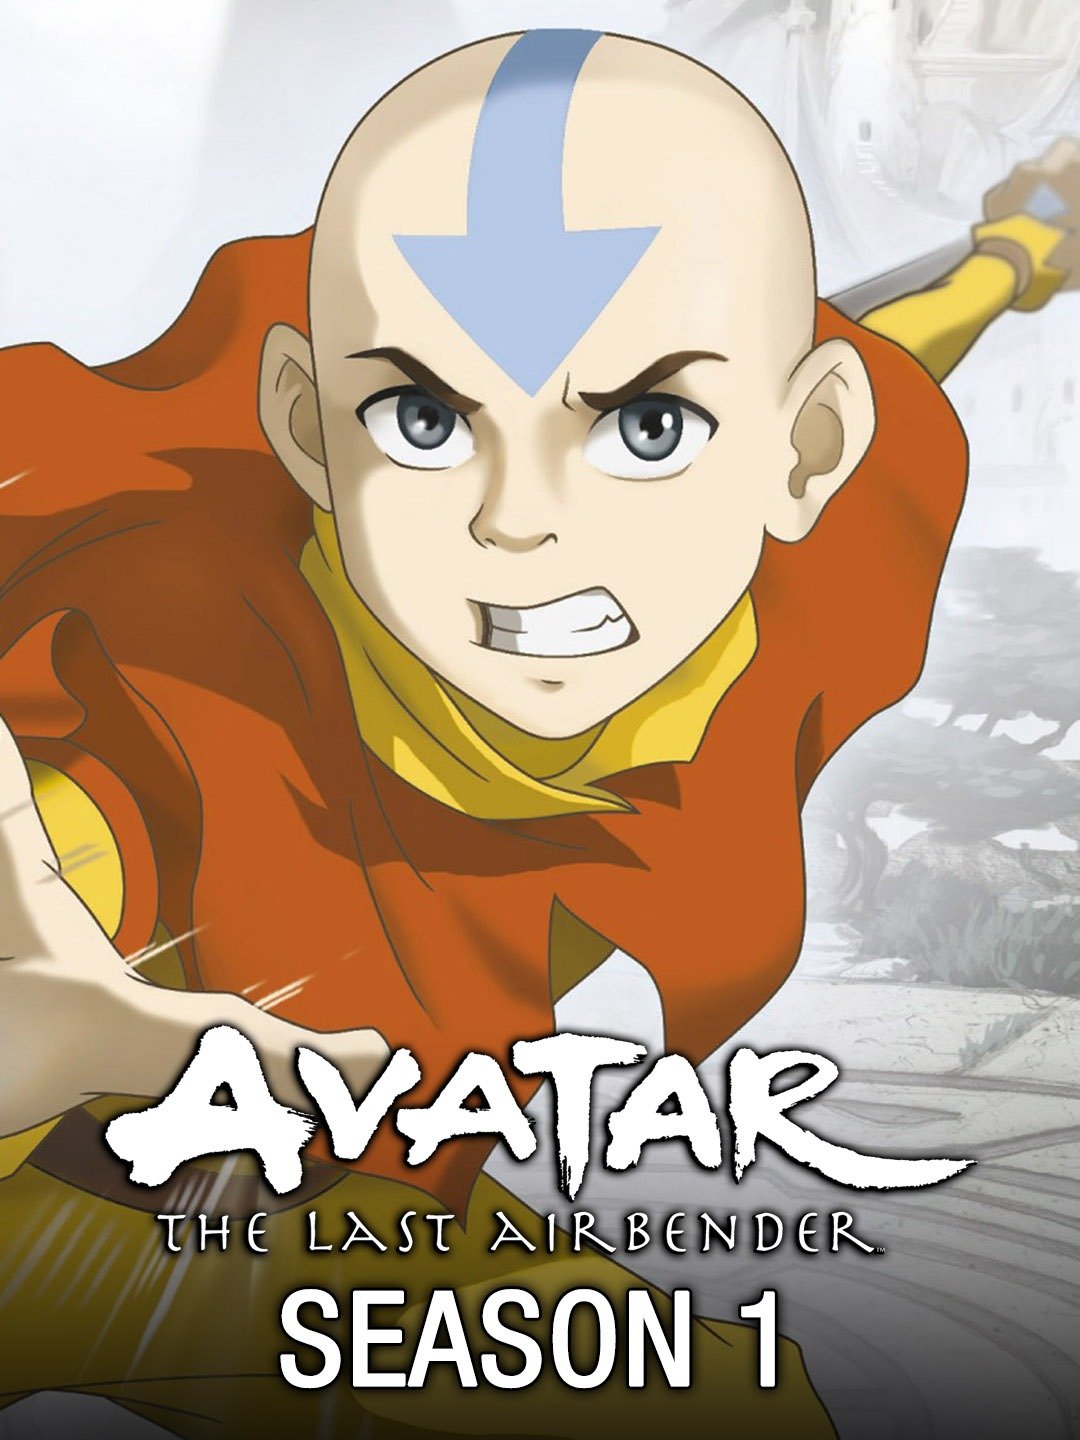 Avatar The Last Airbender Ending Explained Was Fire Lord Ozai Defeated